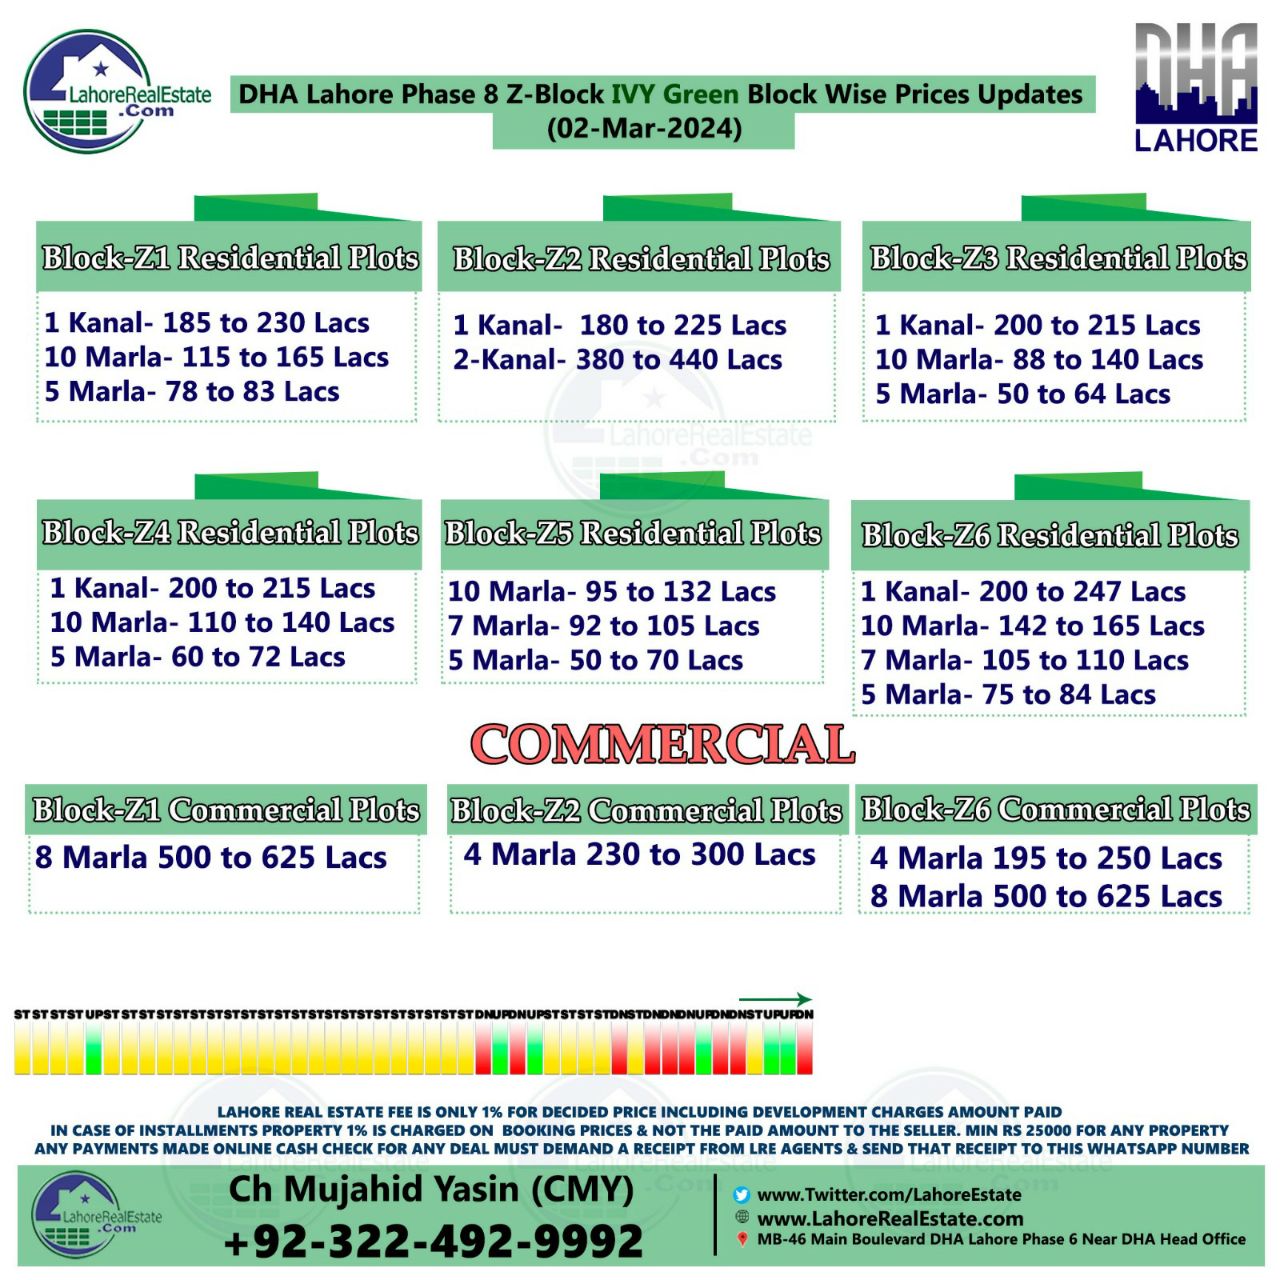 DHA Lahore Phase 8 IVY Green Plot Prices Blockwise Rates 5th March 2024